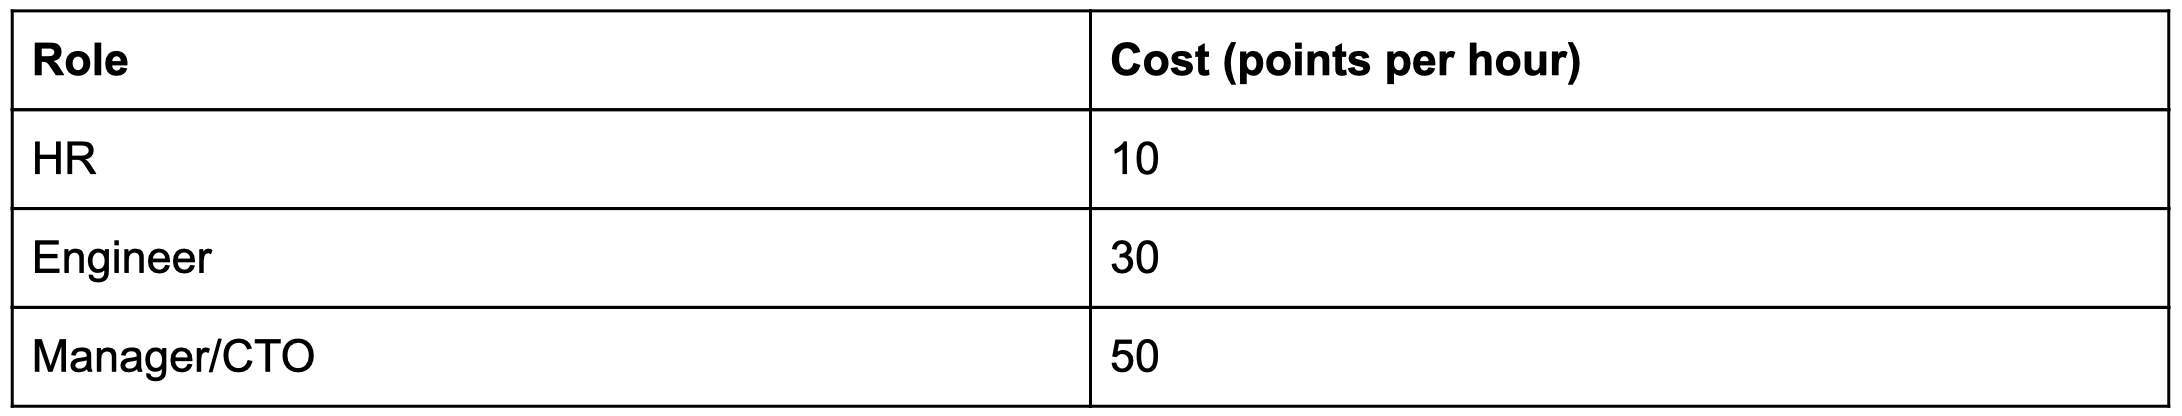 Cost table